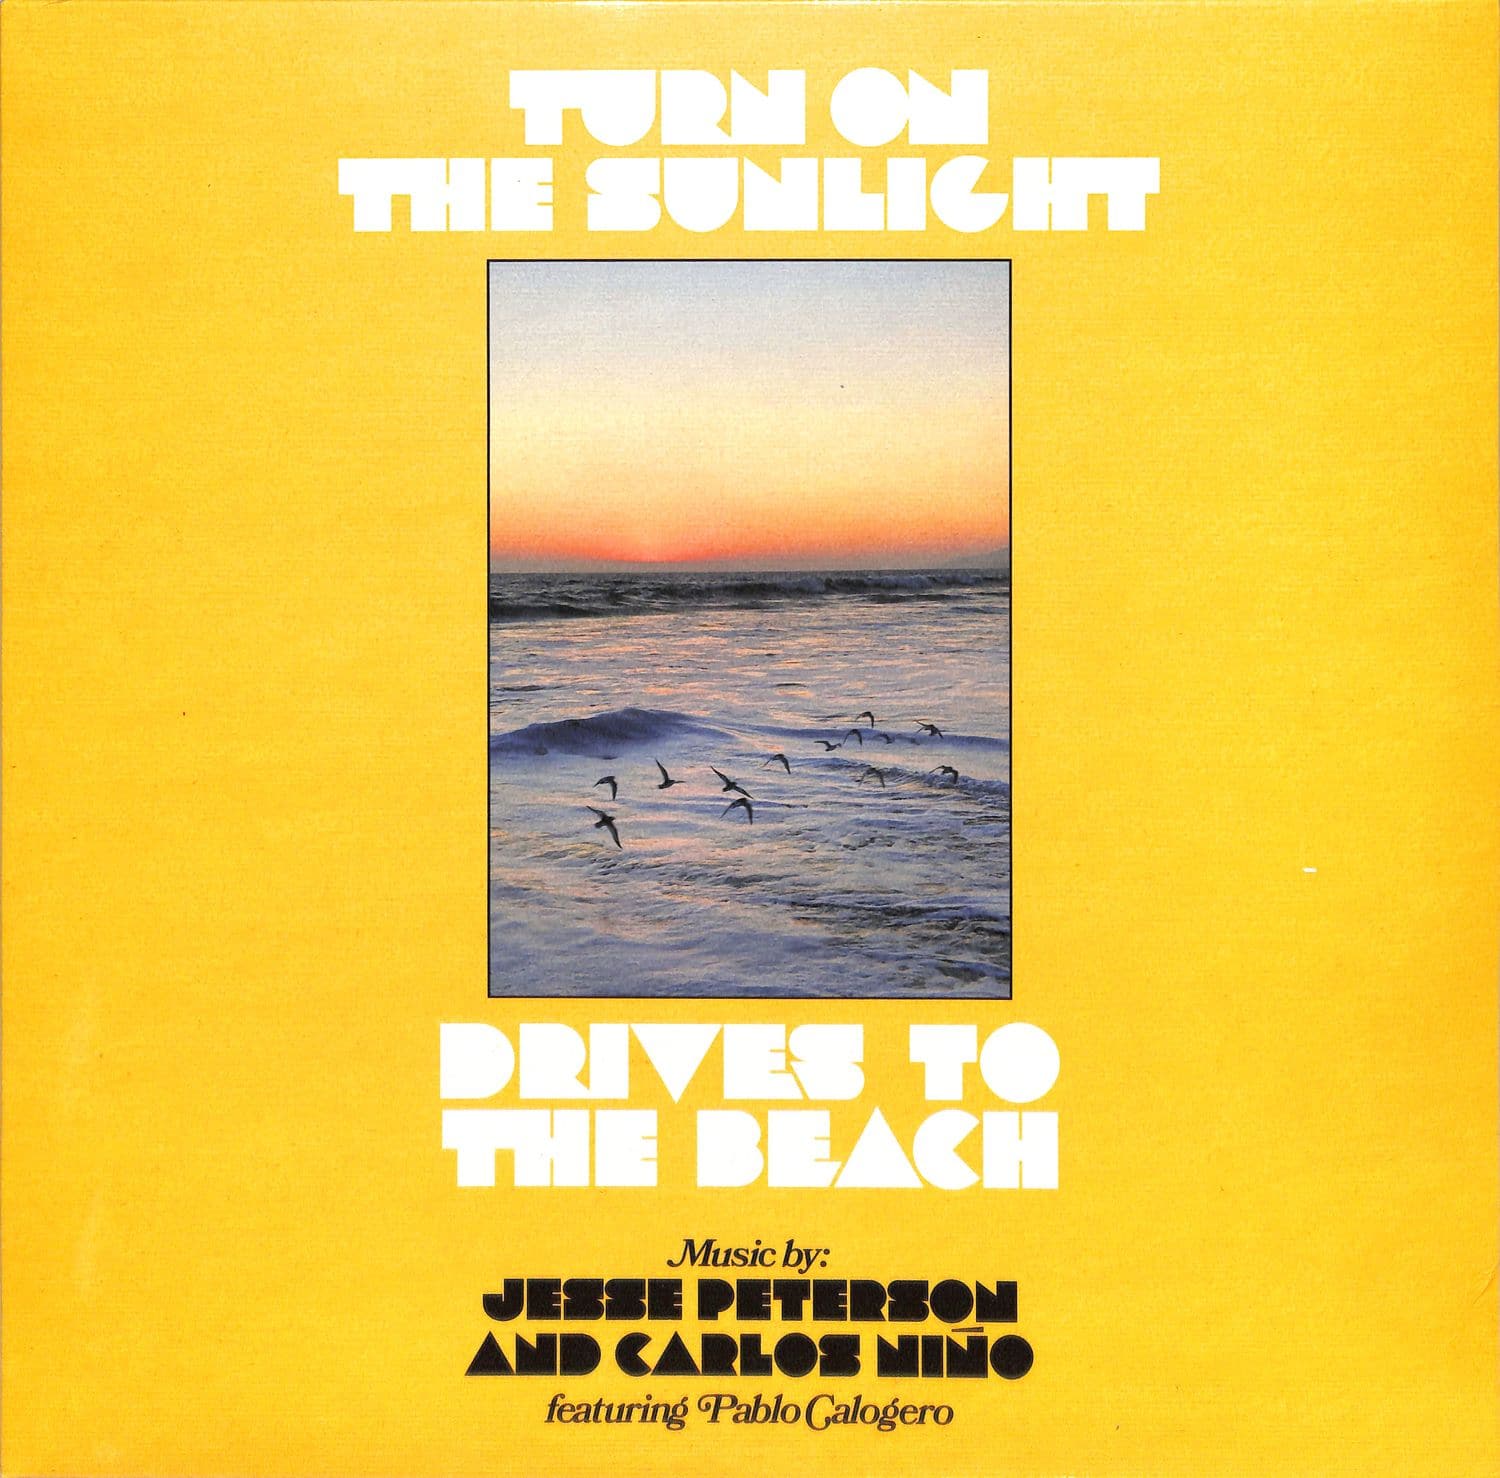 Turn On The Sunlight - DRIVES TO THE BEACH 